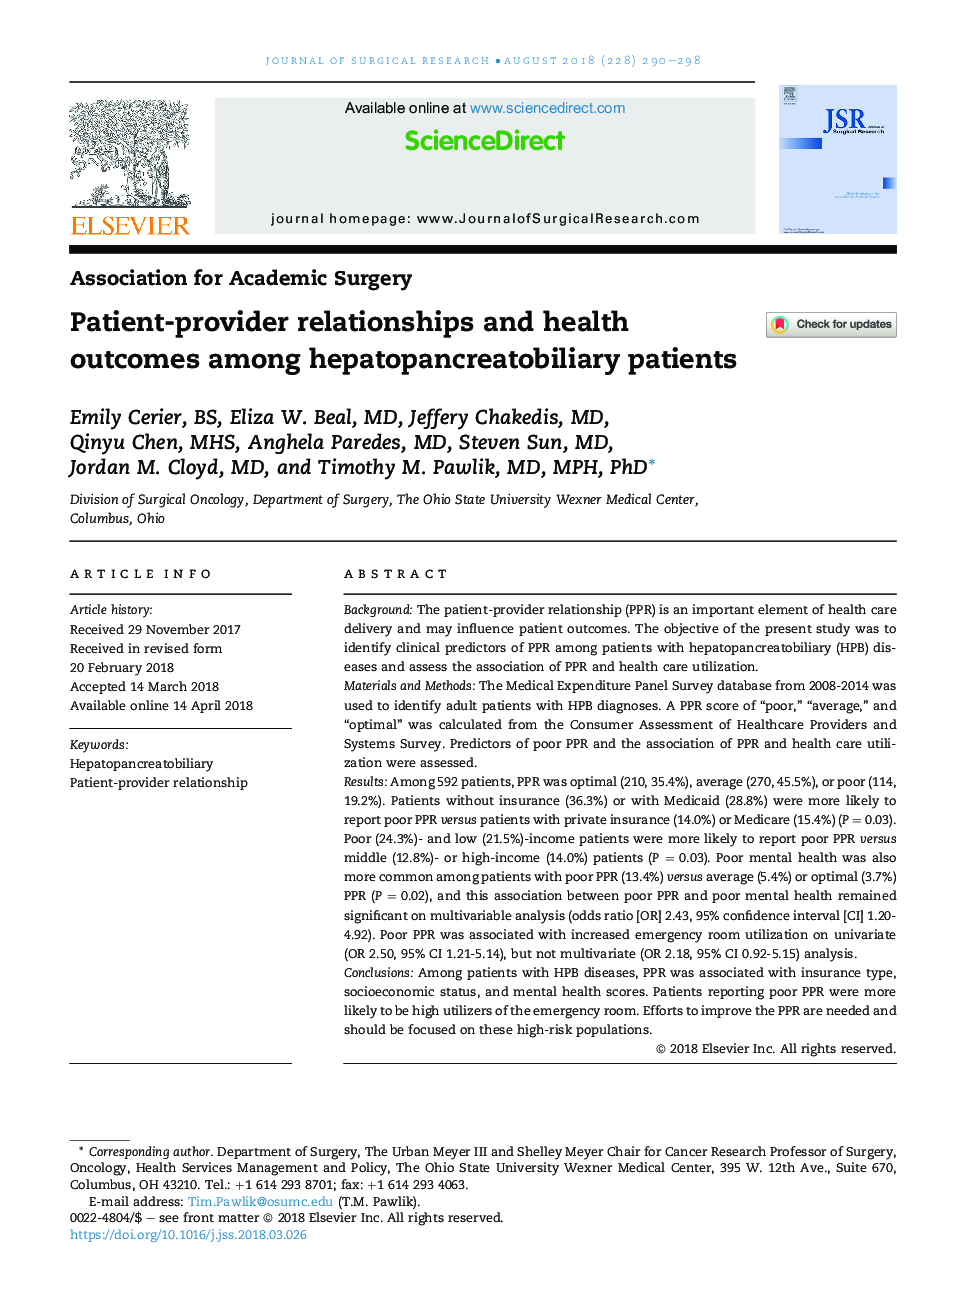 Patient-provider relationships and health outcomes among hepatopancreatobiliary patients